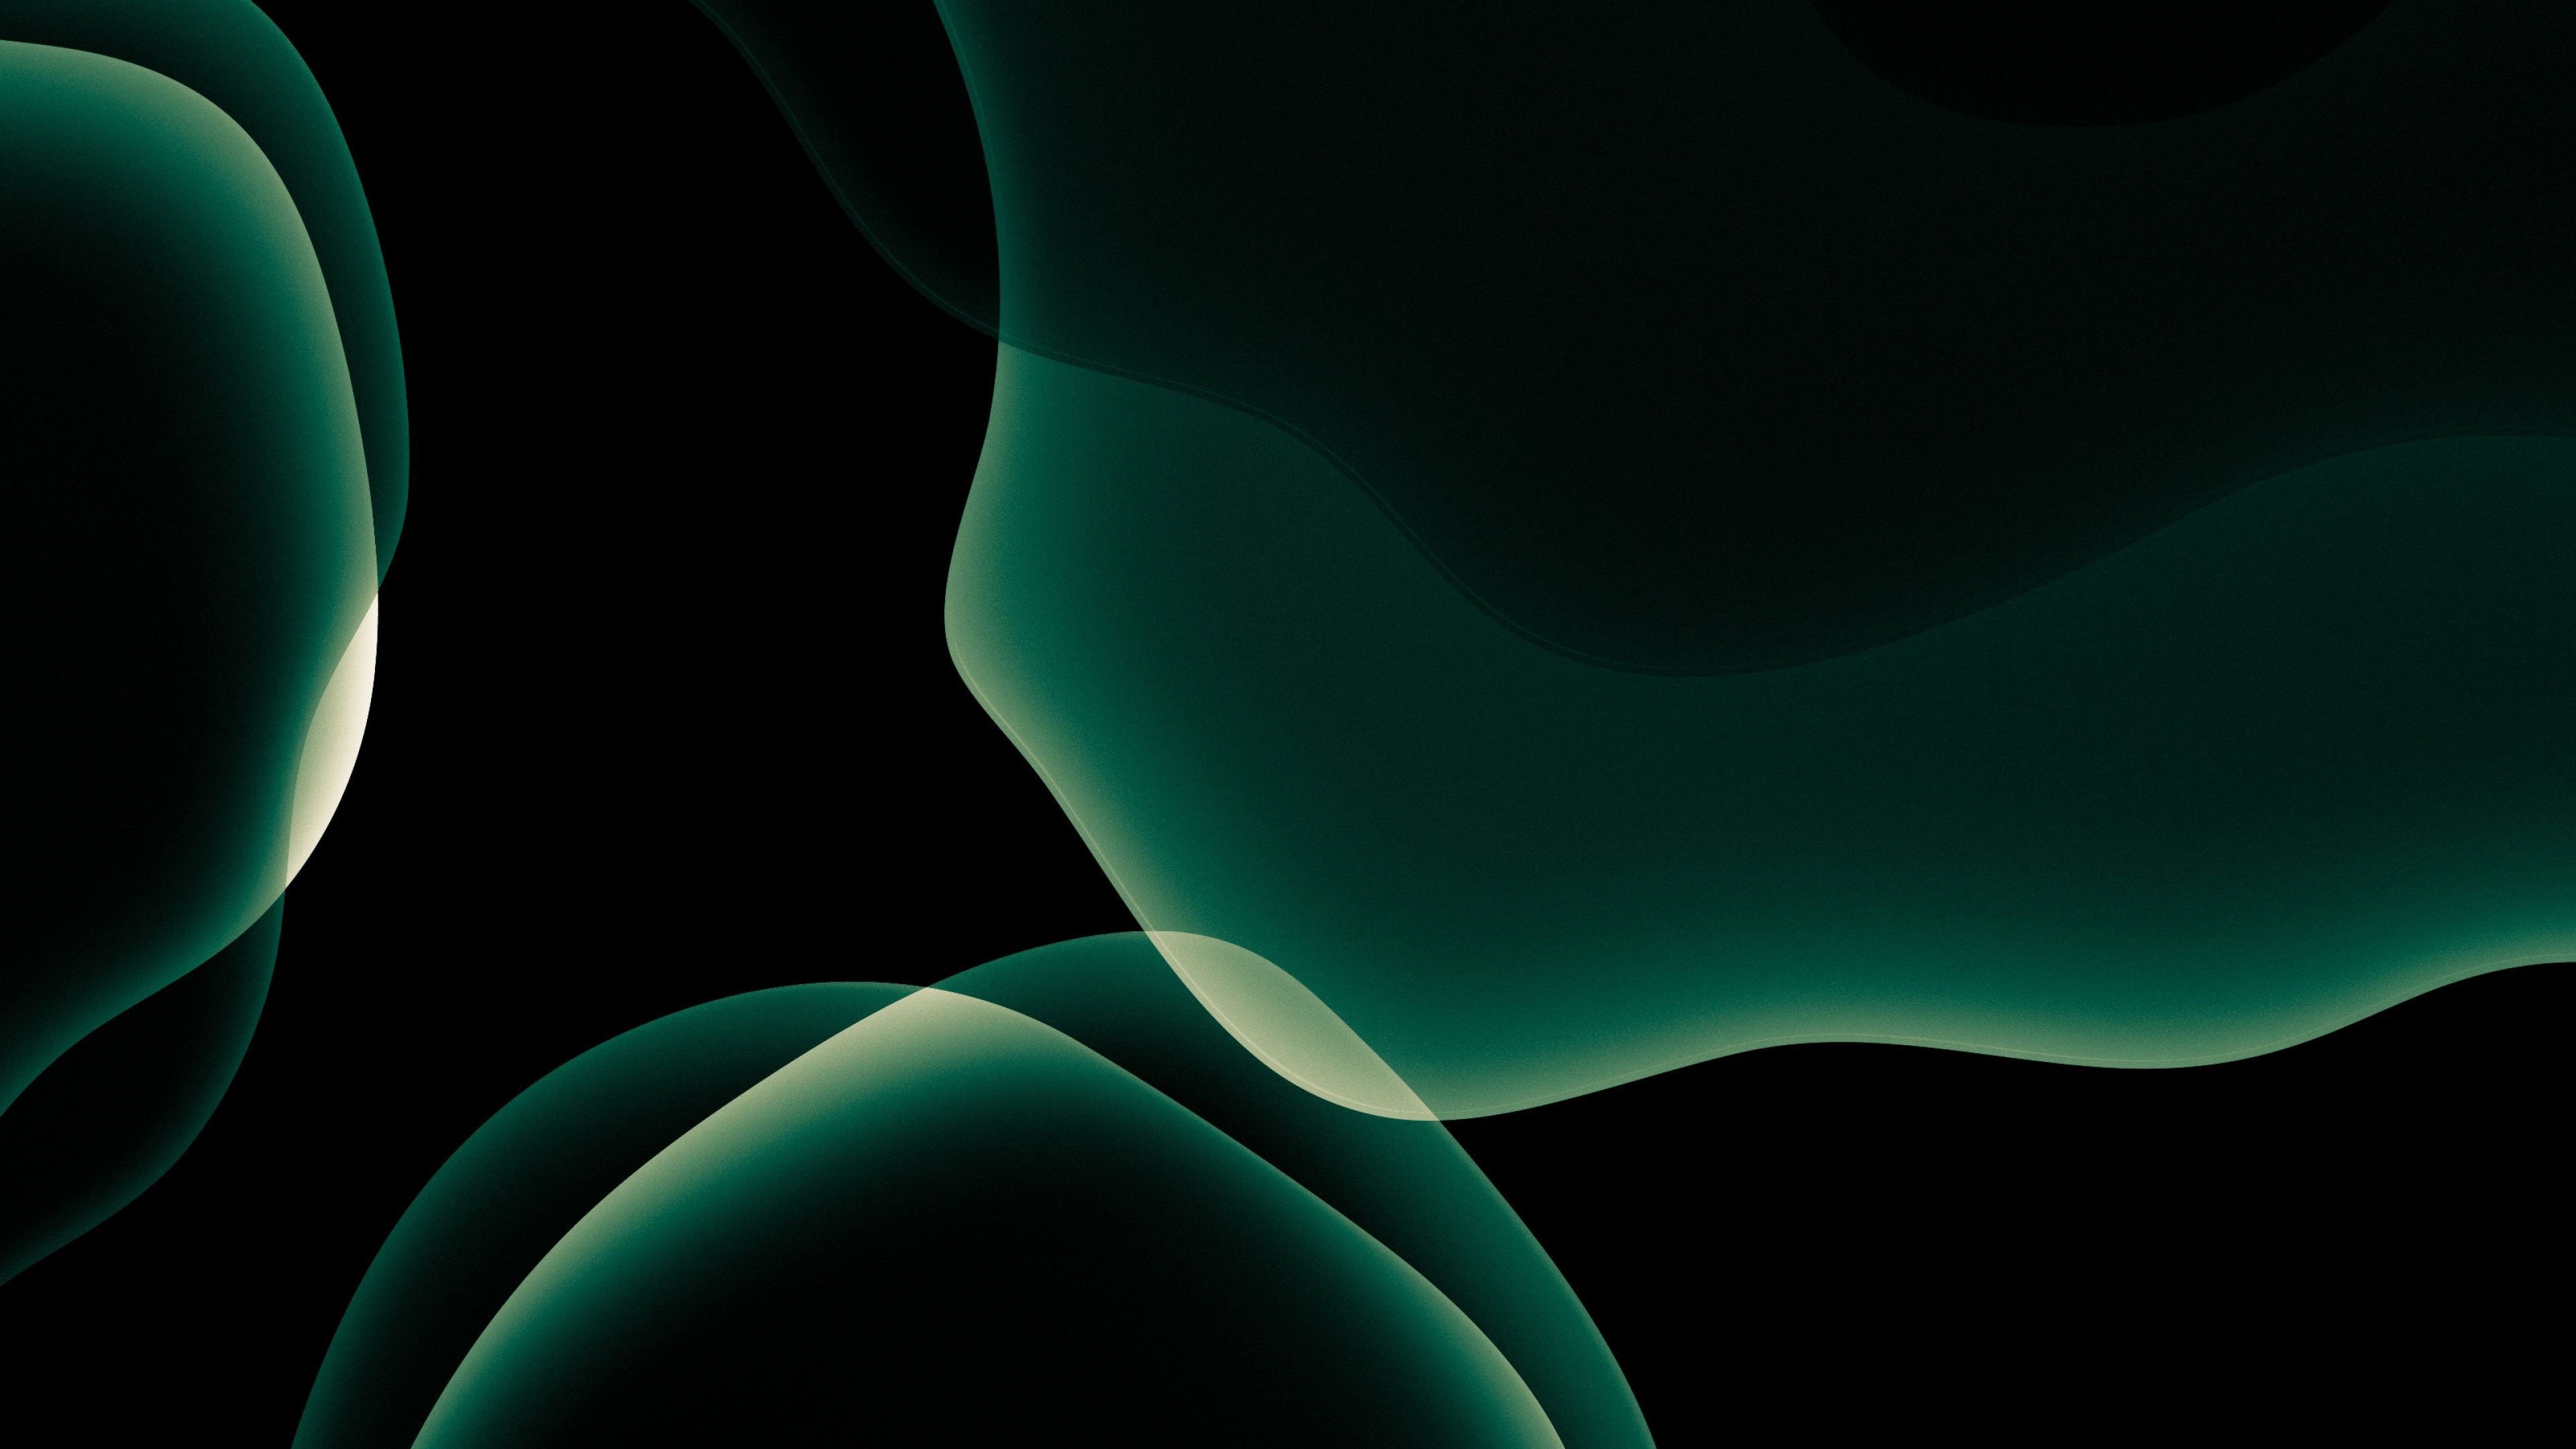 A black background with green shapes on it - Dark green